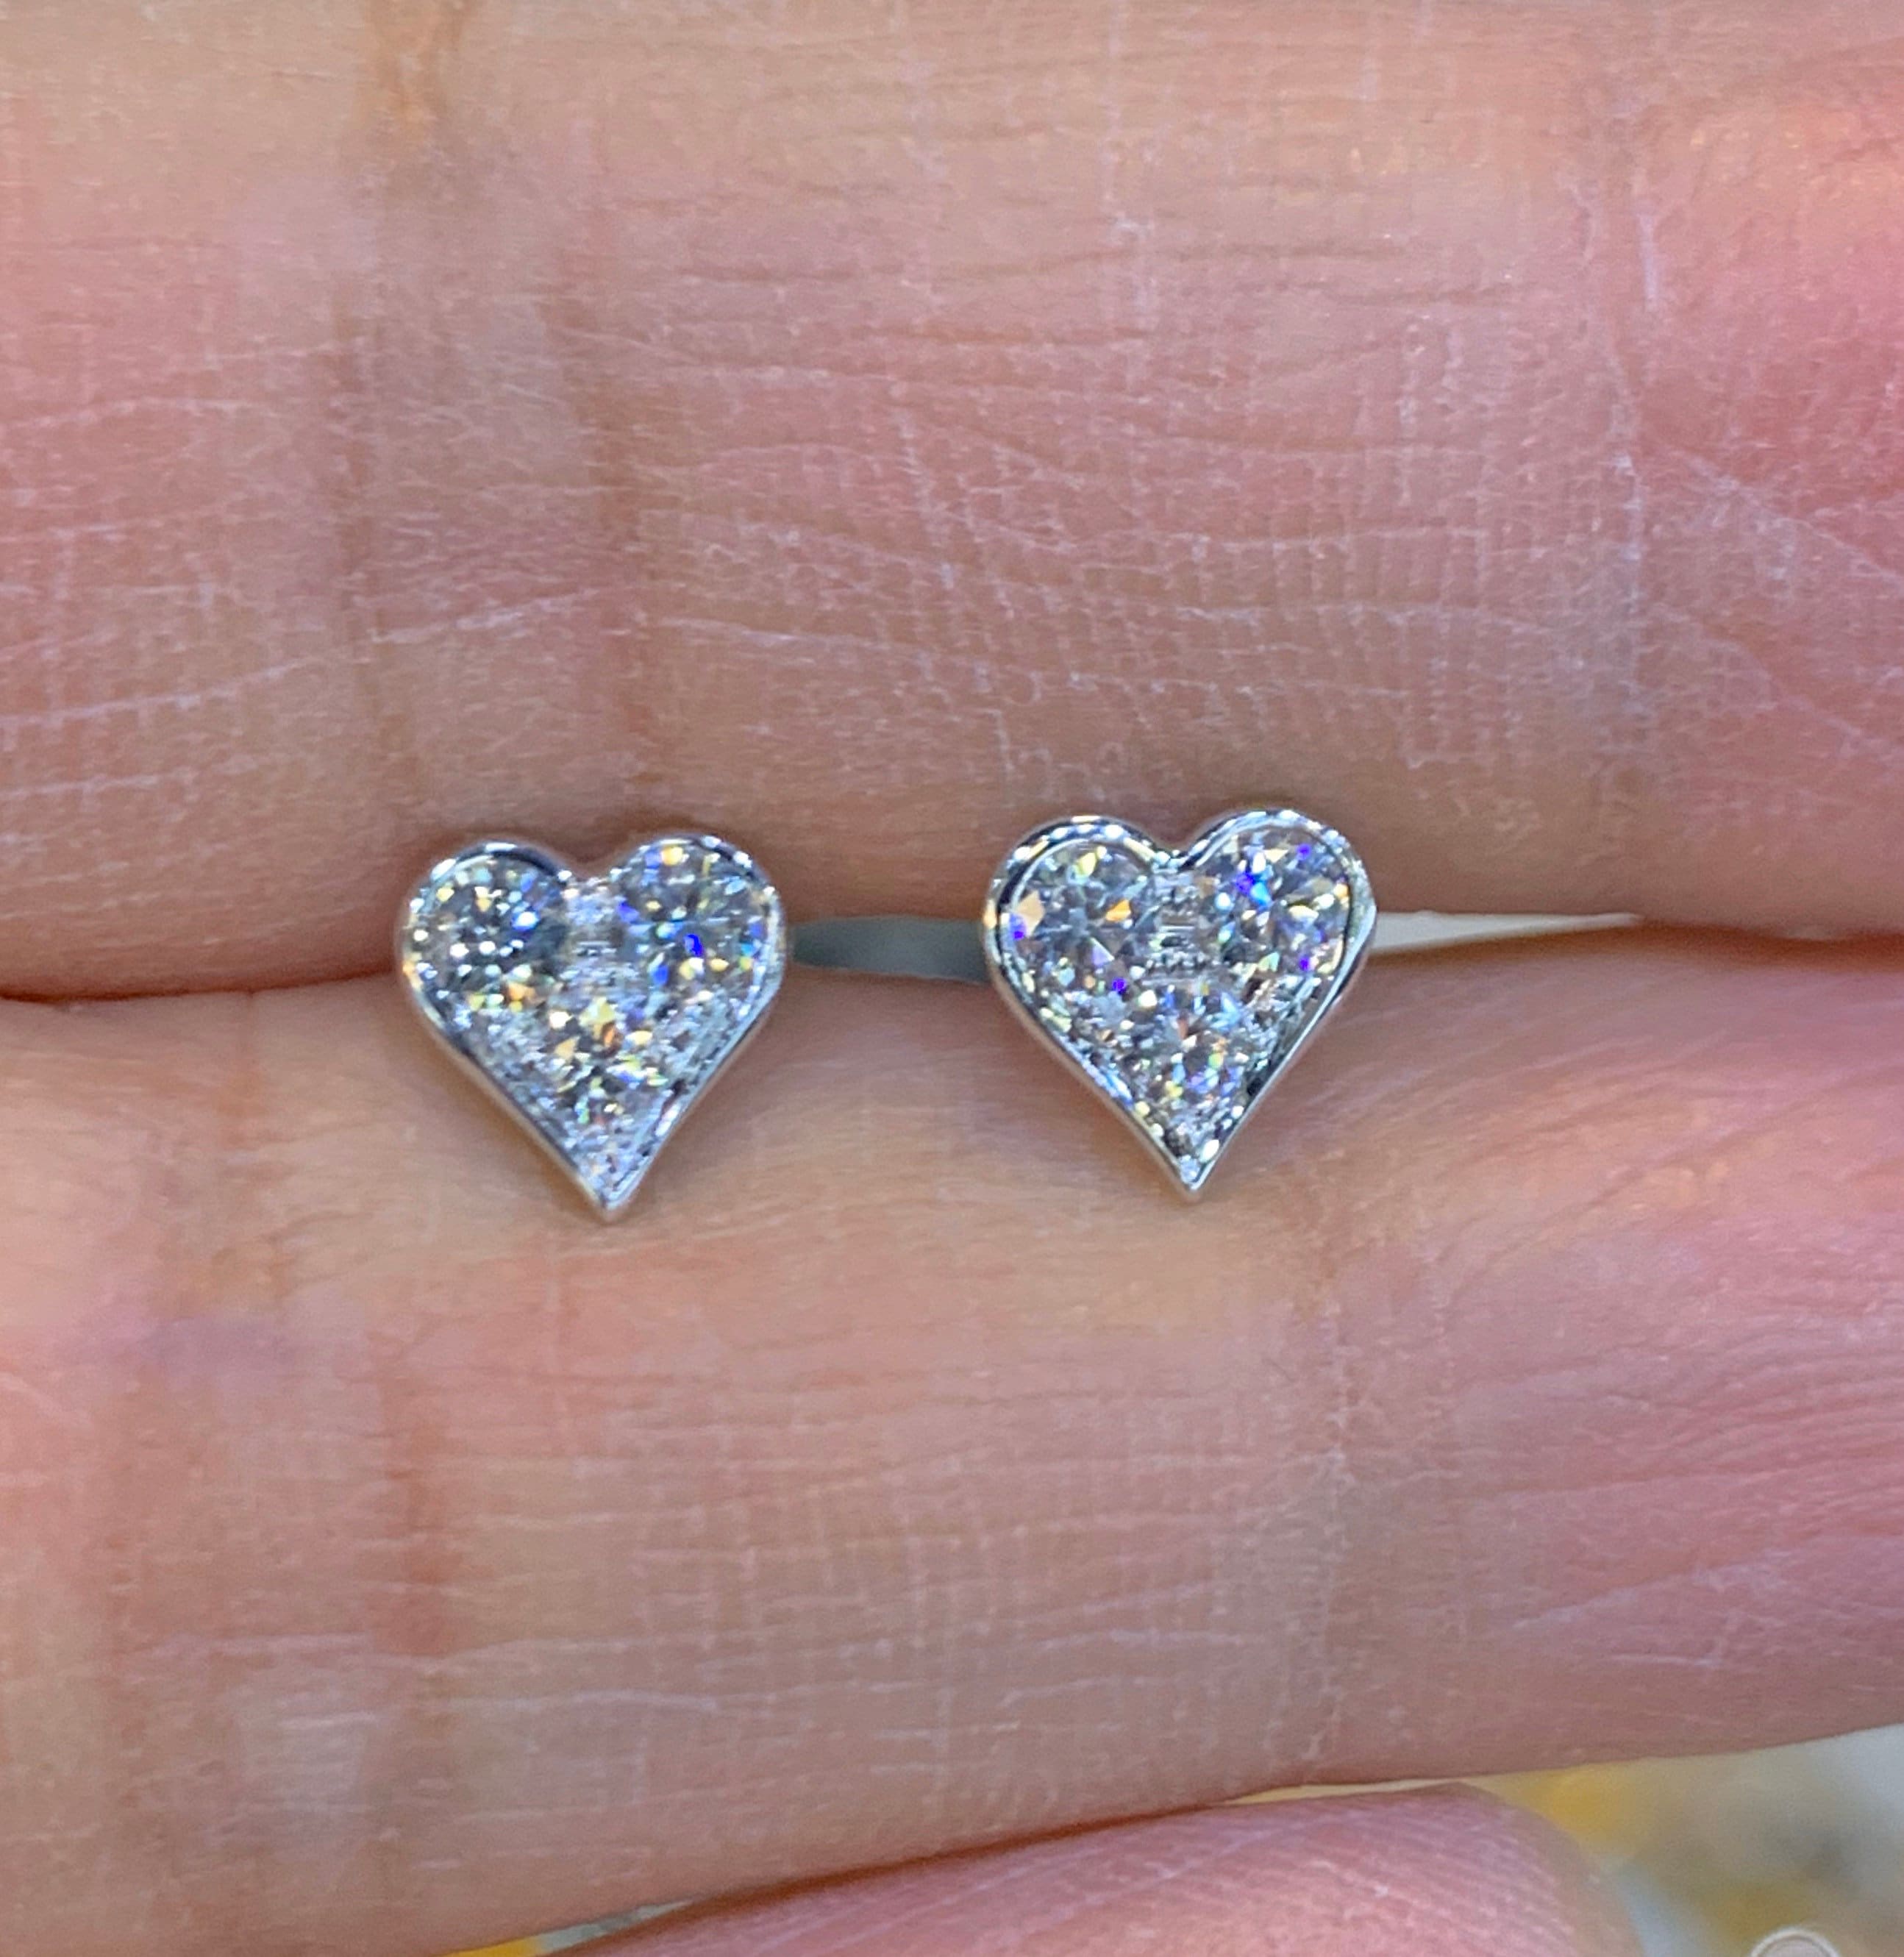 Heart shaped Diamond Solitaire Earrings - JD SOLITAIRE